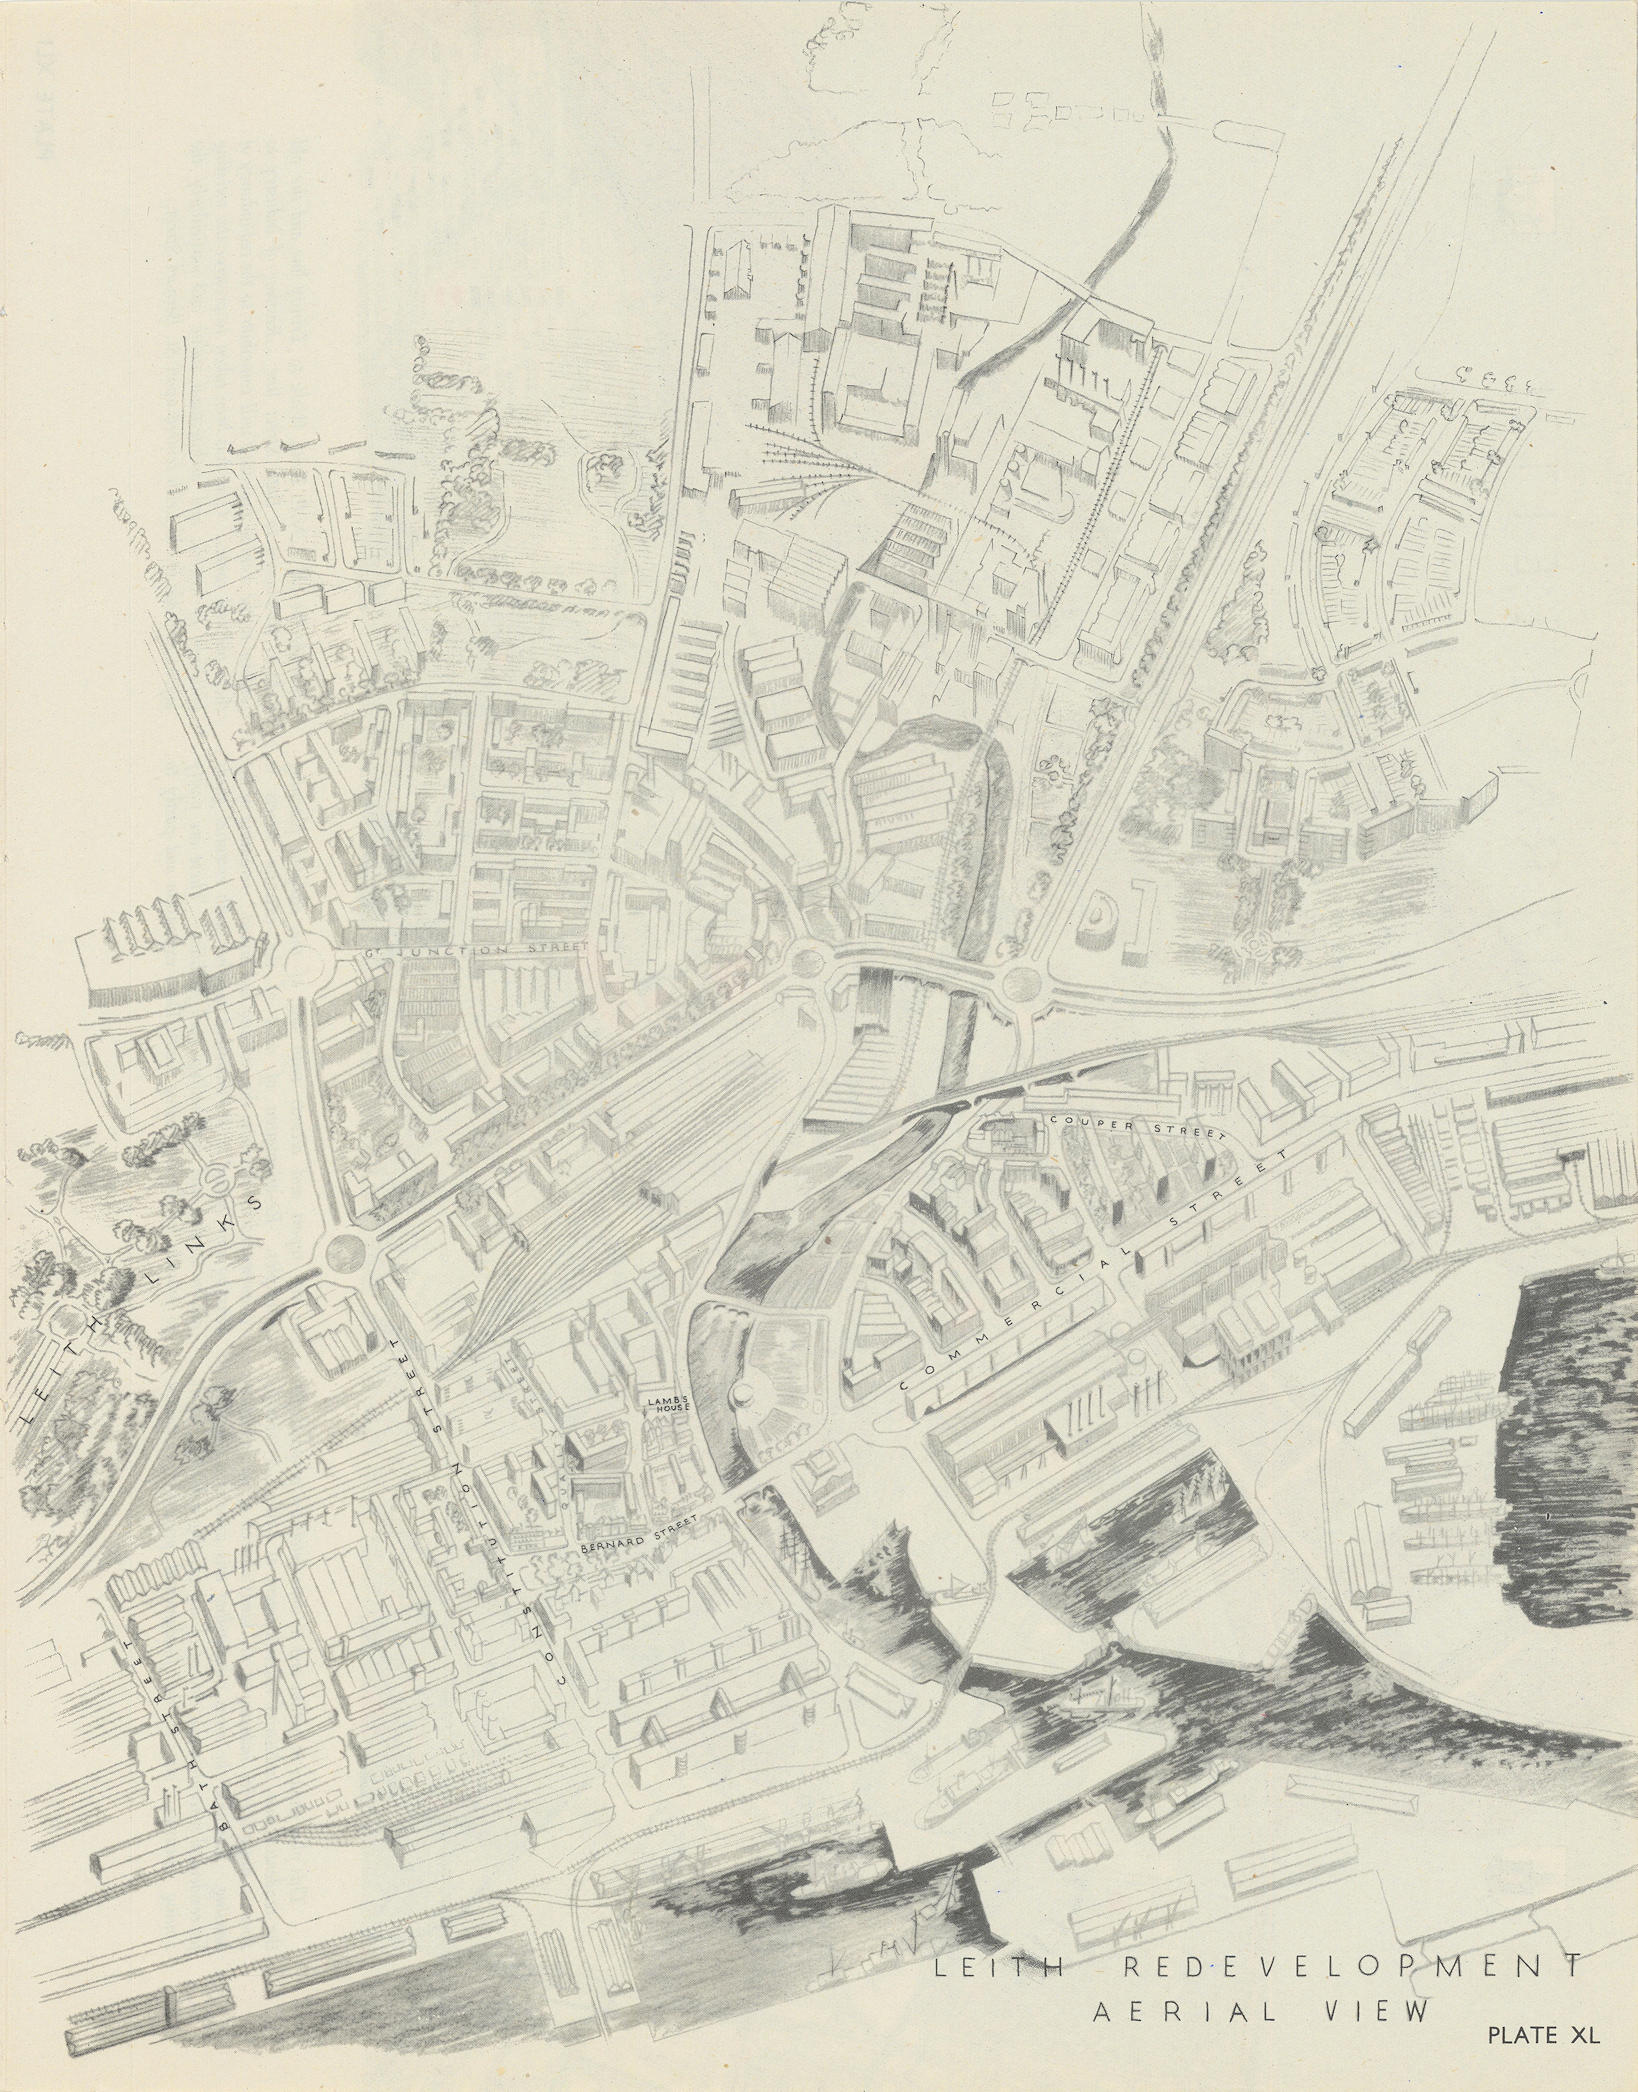 EDINBURGH. Leith Redevelopment proposal aerial view. ABERCROMBIE 1949 old map